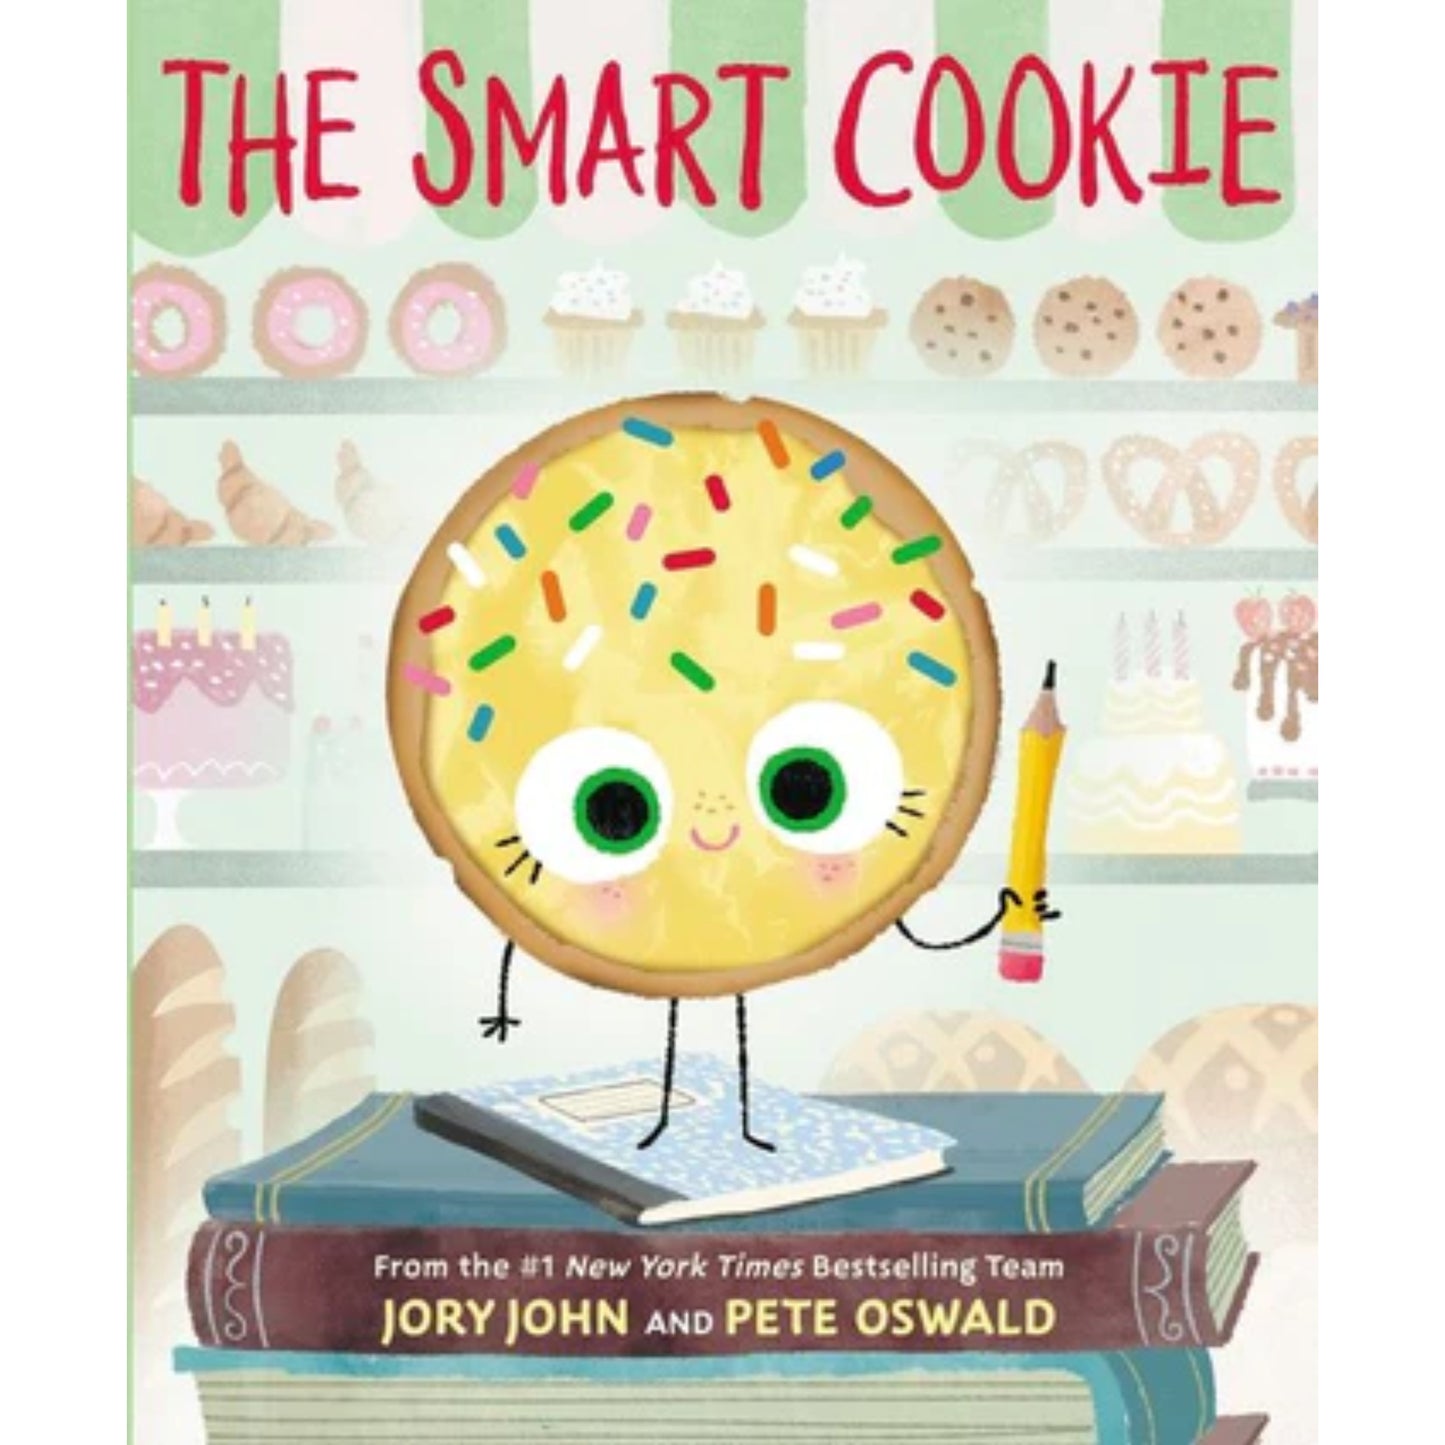 The Smart Cookie by Jory John